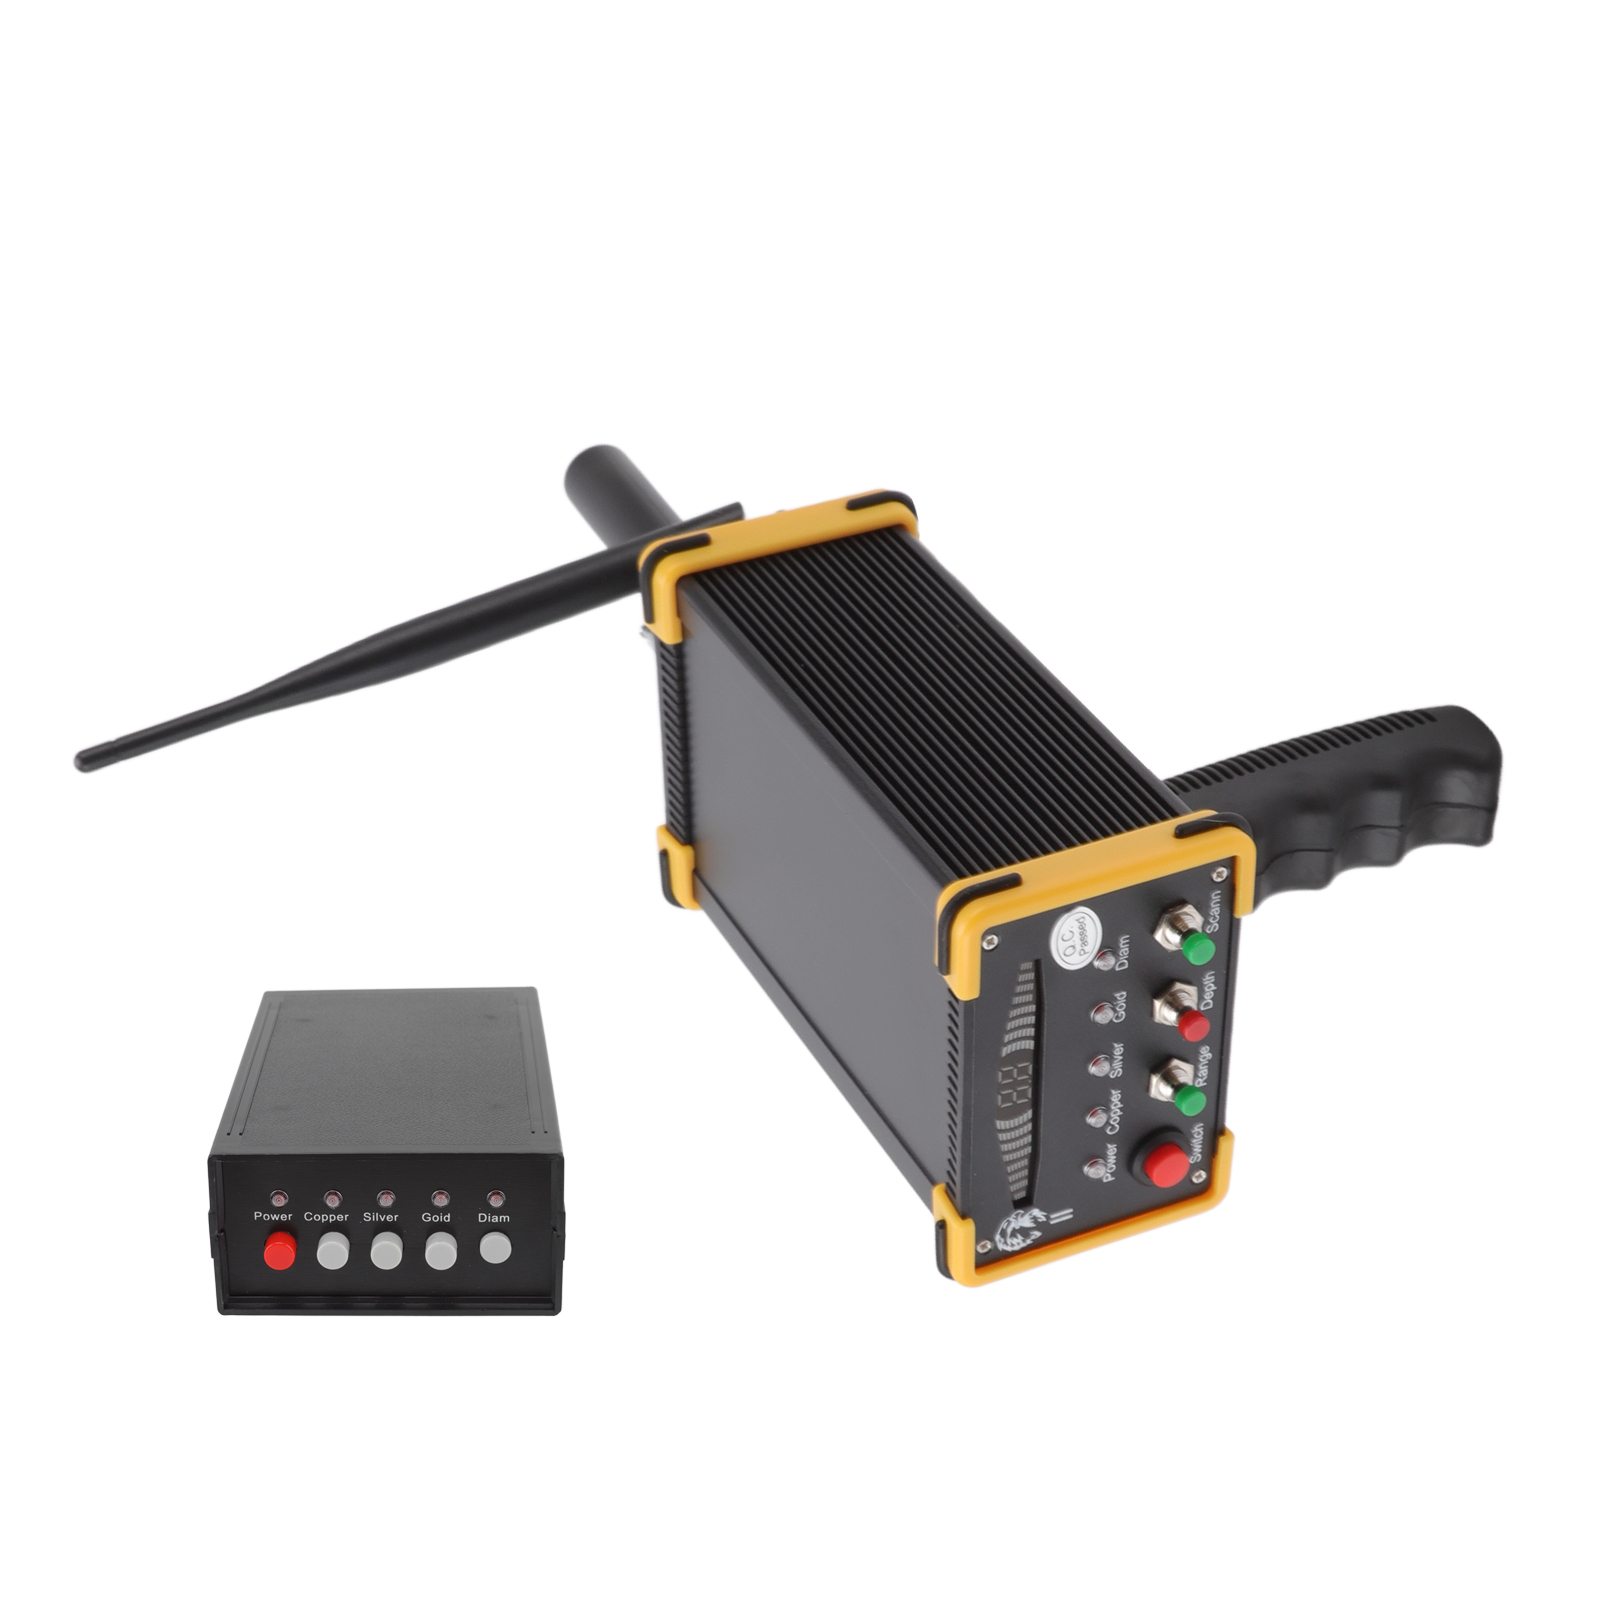 New Black Hawk 2 generation with infrared remote handheld metal detector can distinguish silvergold diamond and gem